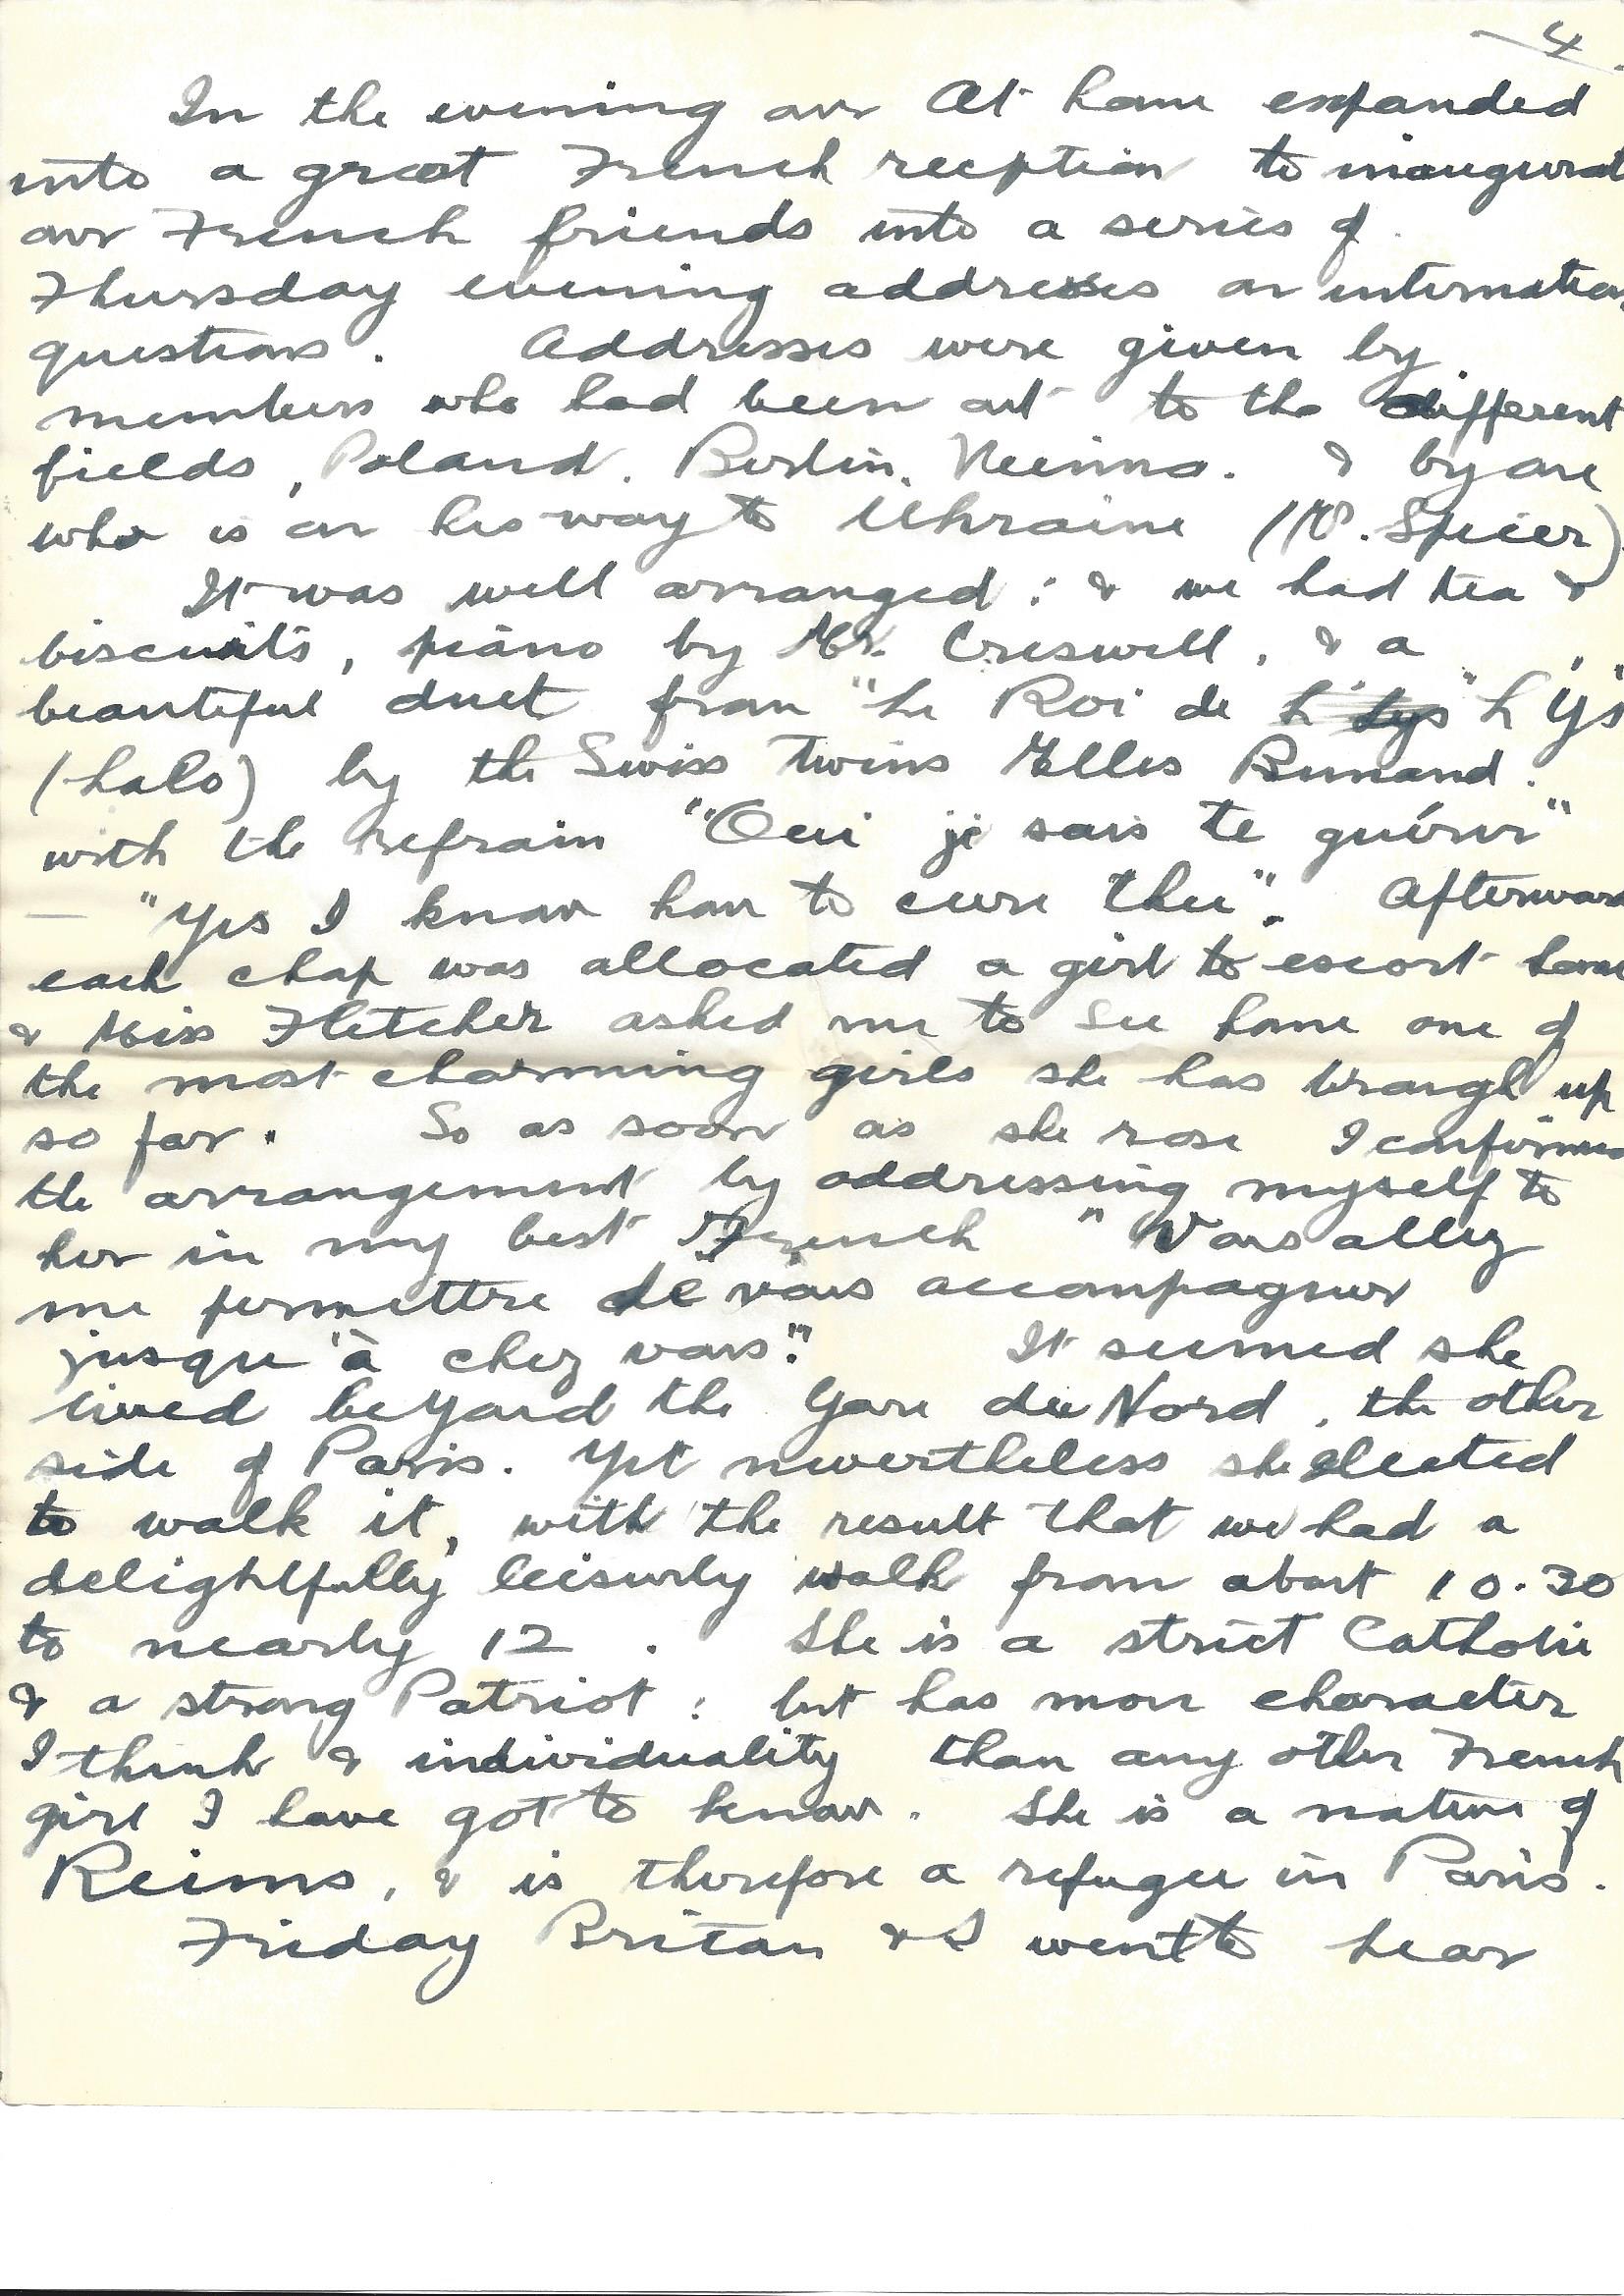 1920-01-18 page 5 letter by Donald Bearman